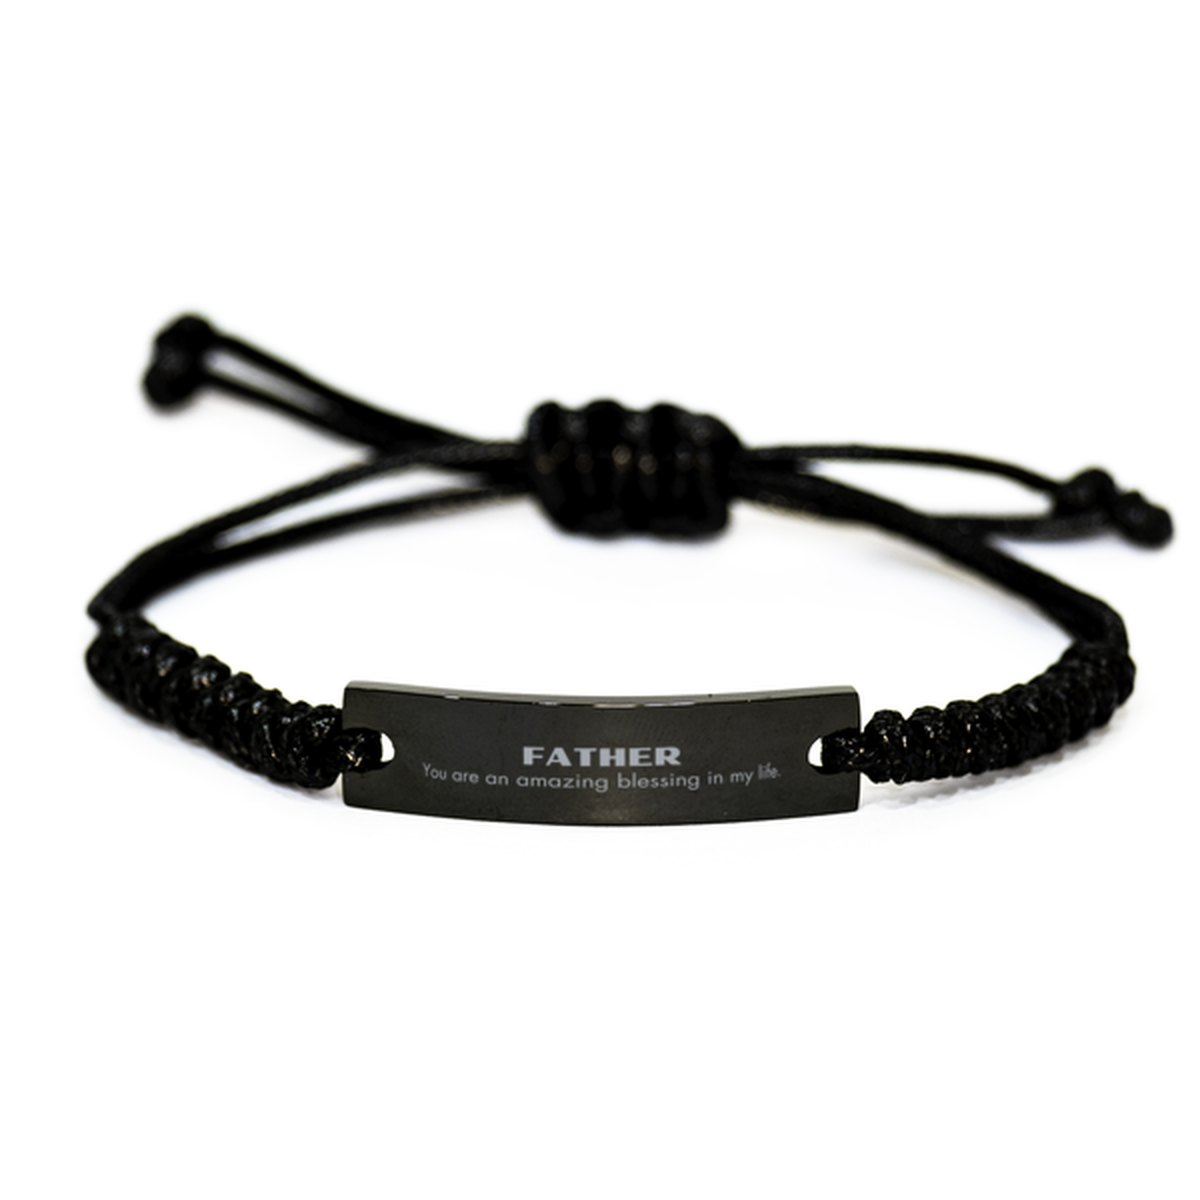 Father Black Rope Bracelet, You are an amazing blessing in my life, Thank You Gifts For Father, Inspirational Birthday Christmas Unique Gifts For Father